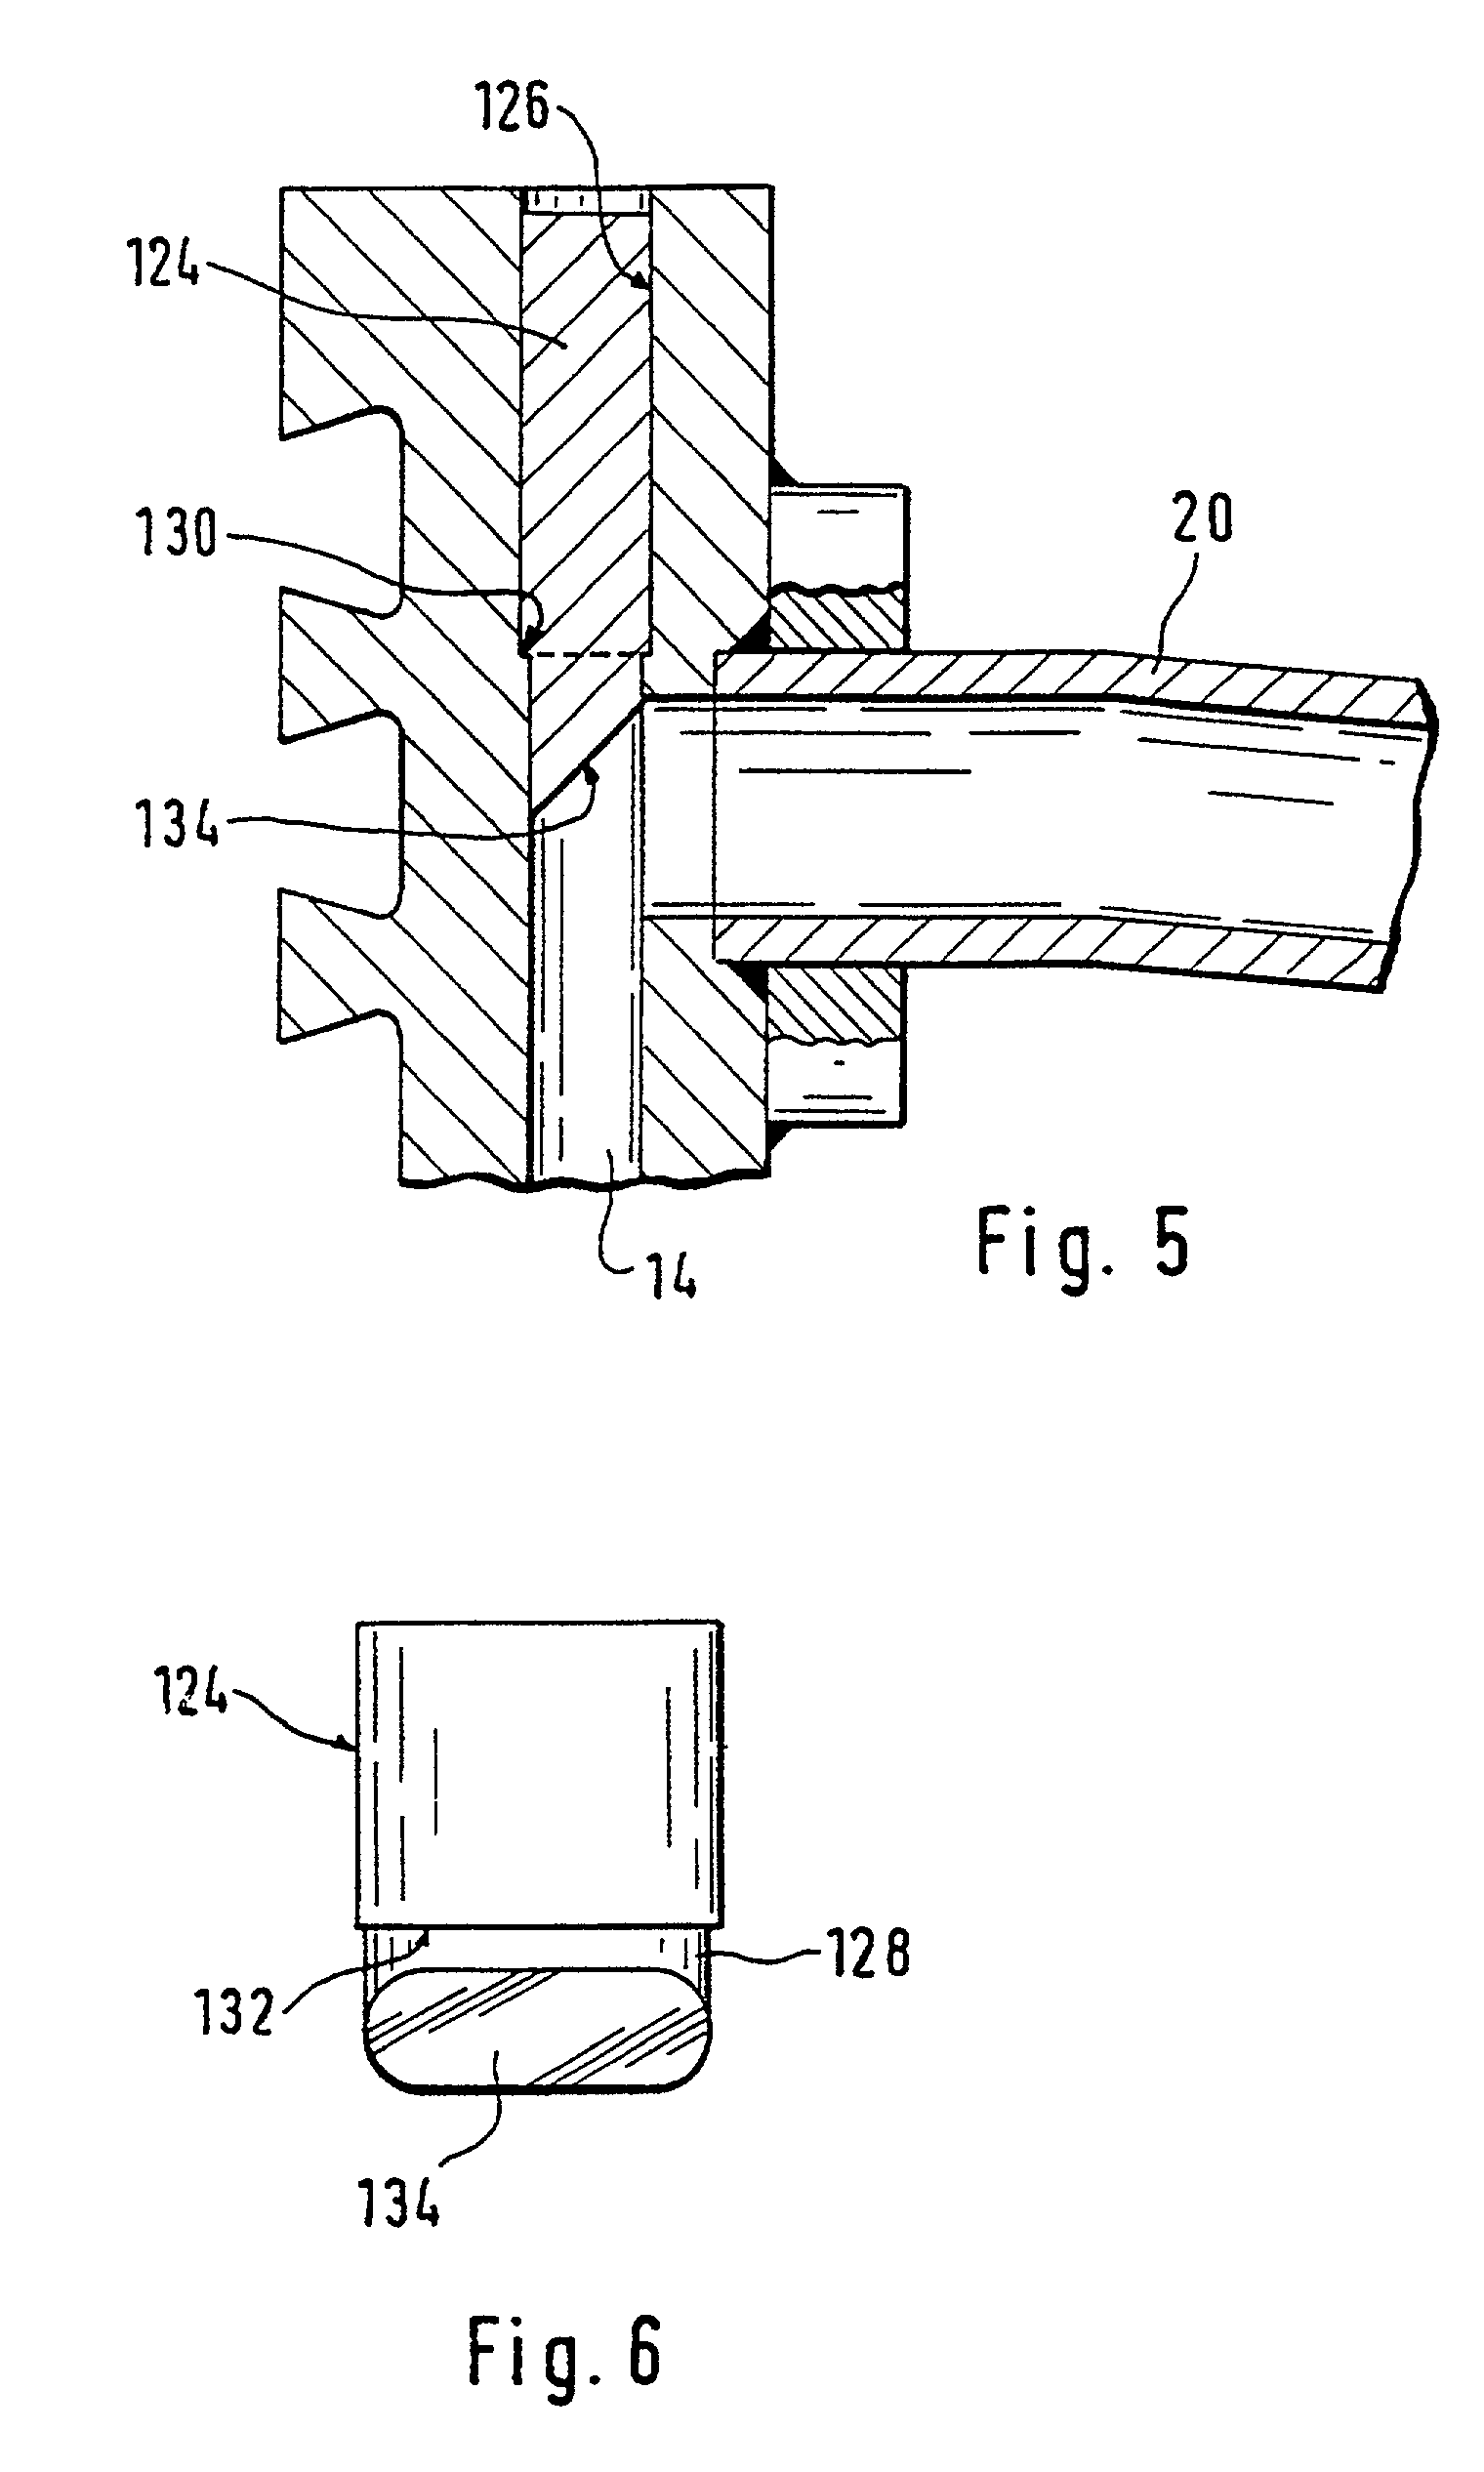 Cooling panel for a furnace for producing iron or steel